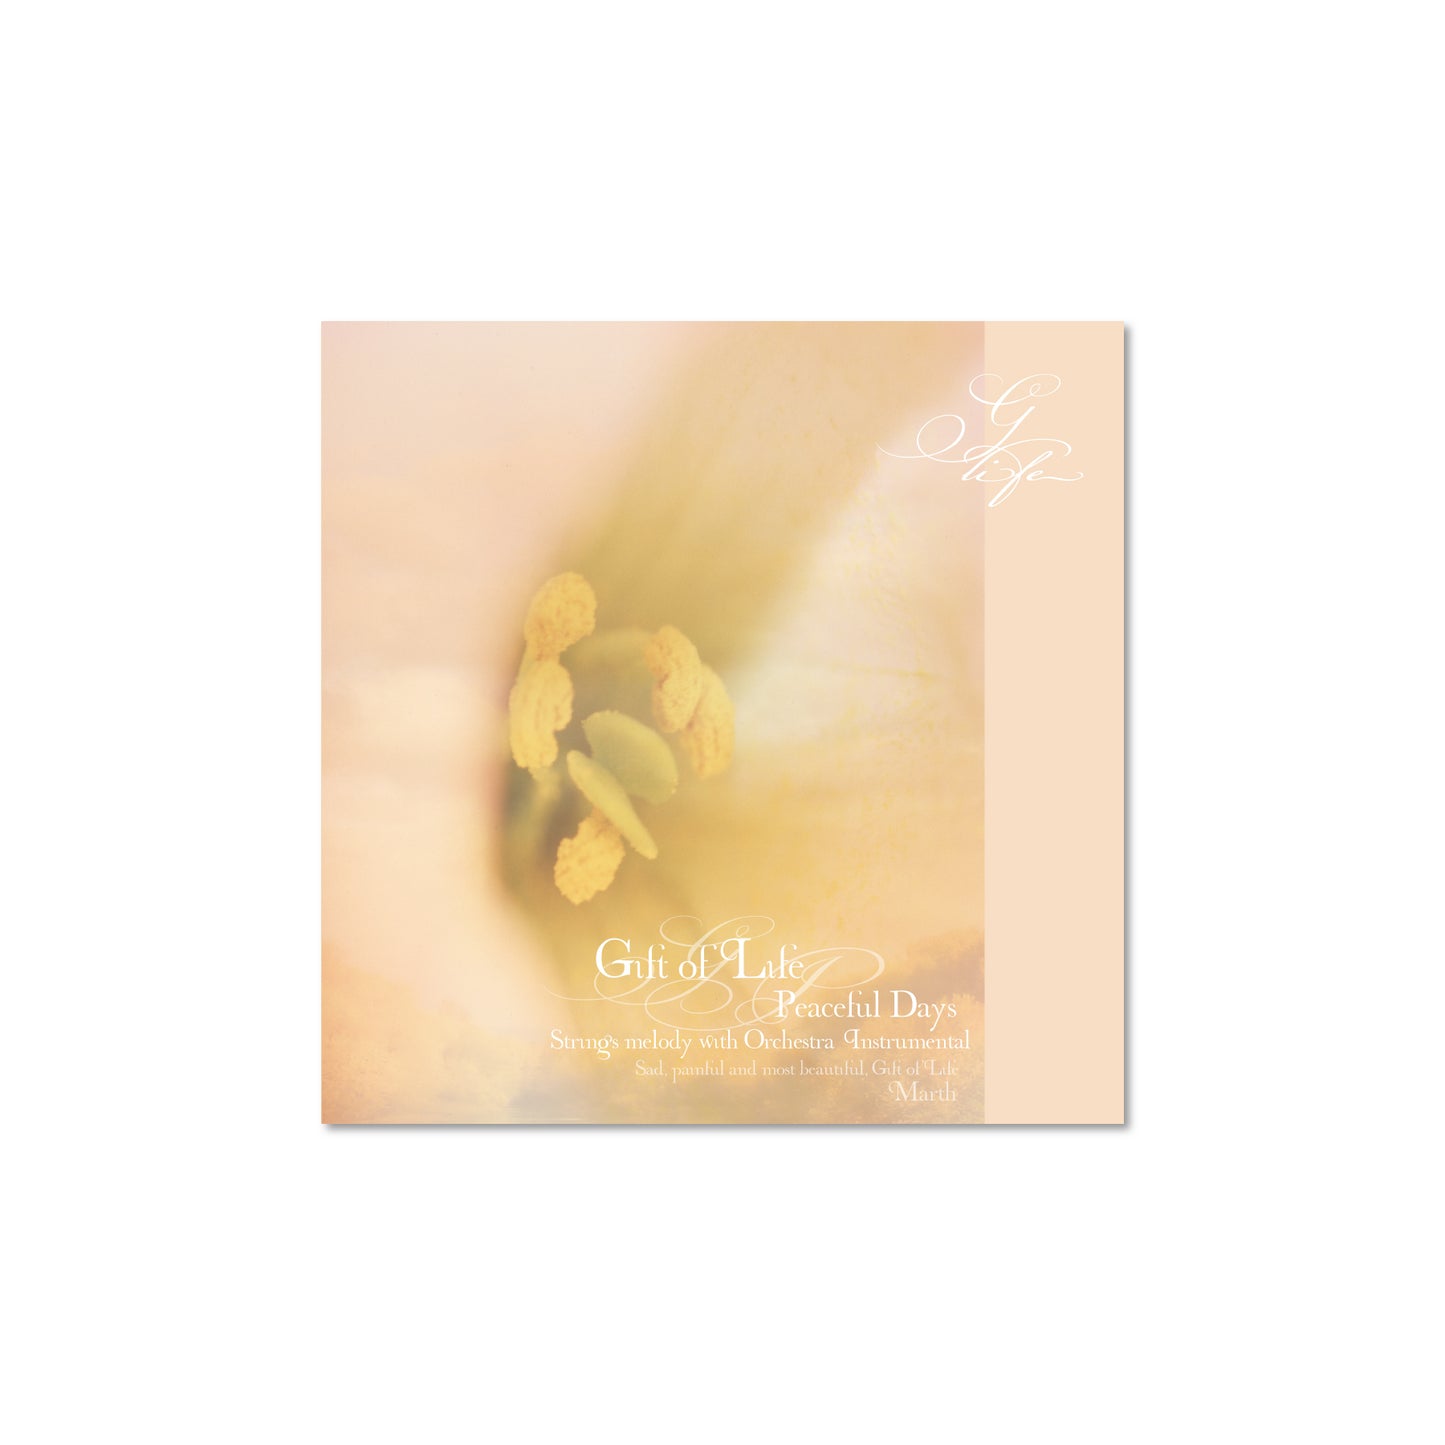 CD Peaceful Days - Gift of Life - Strings Melody with Orchestra